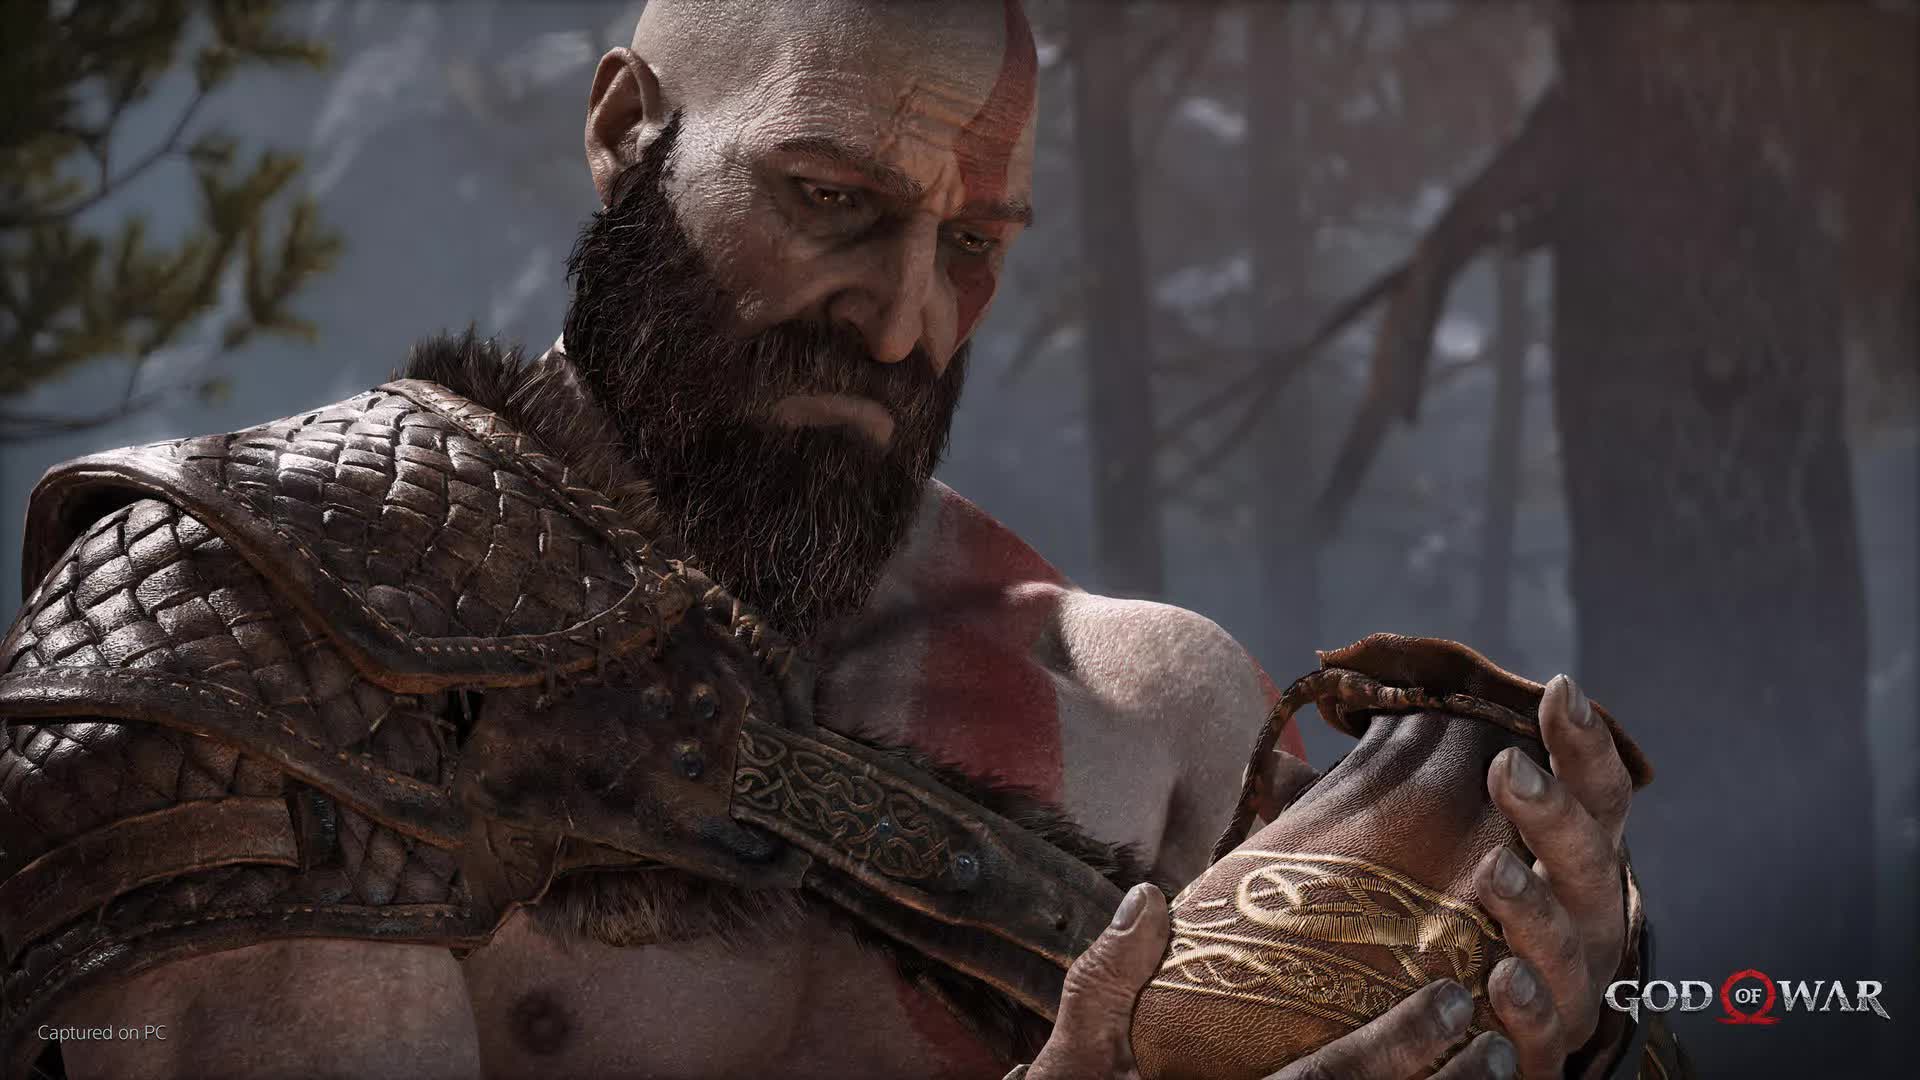 God of War Ragnarok could hit PC as soon as this month